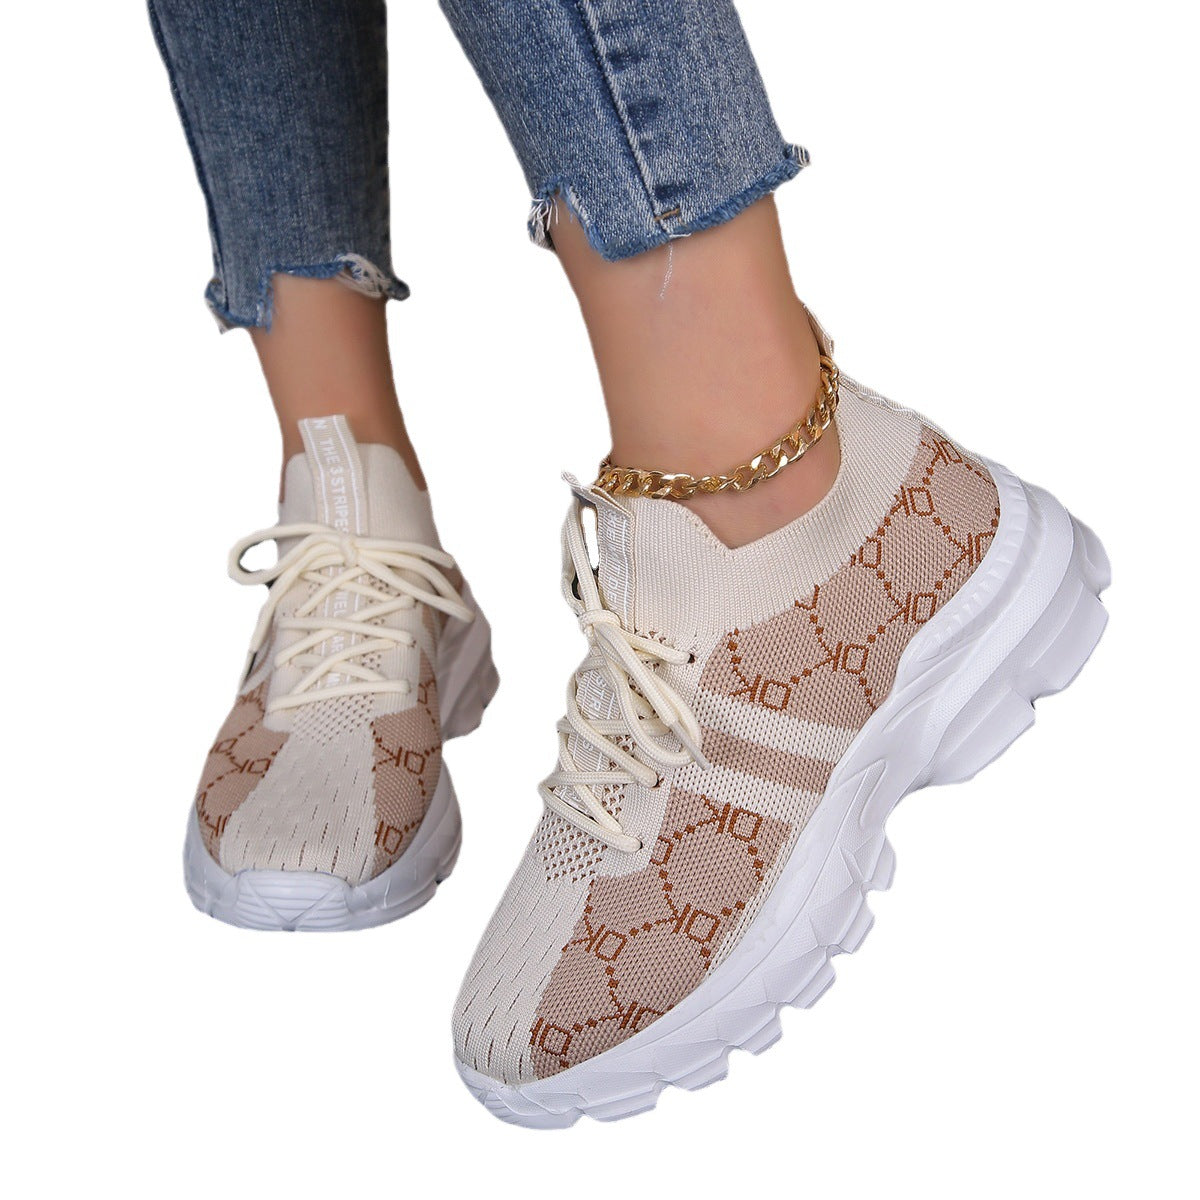 Women's Breathable Canvas Sneakers Mesh Lace Up Flat Shoes Fashion Casual Lightweight Running Sports Shoes - ROMART GLOBAL LTD